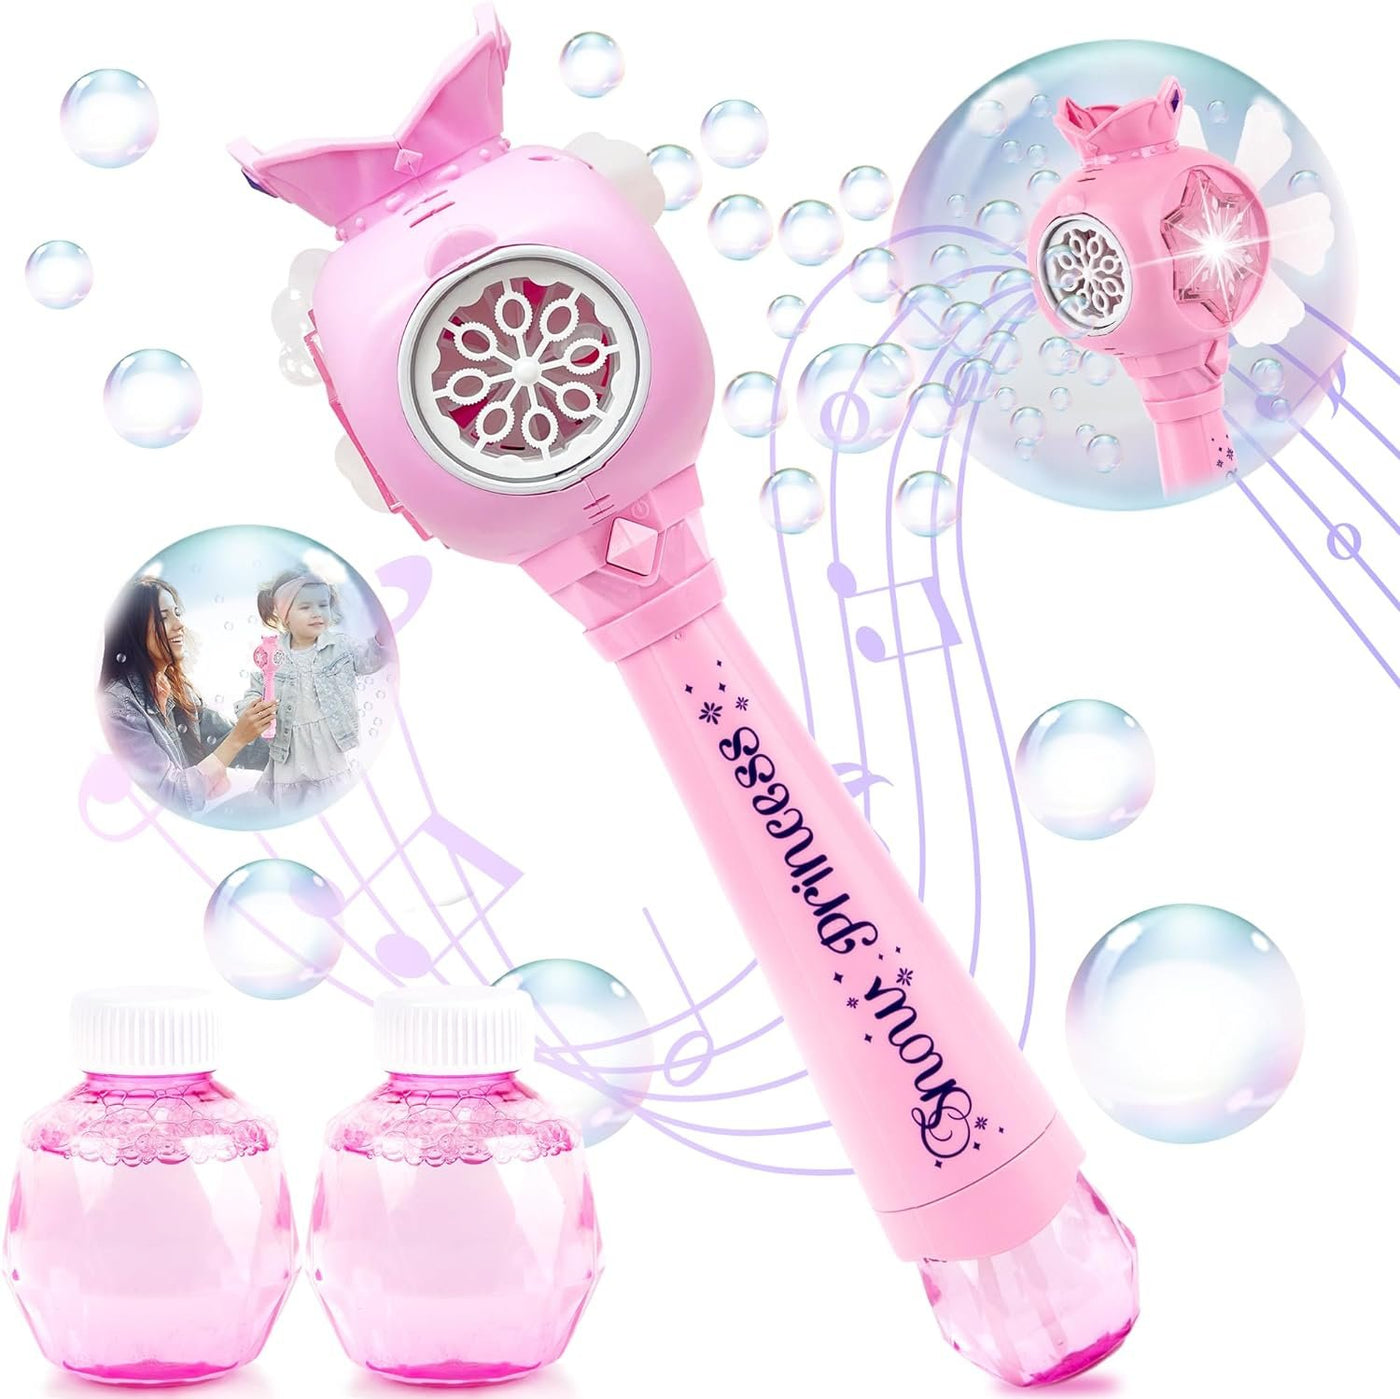 Light Up Princess Magic Bubble Blower Wand with Detachable Windmill, Princess Wand for Girls with 2 Bottles of Bubble Solution, LED Effects, & Music, Fun Pretend Play Prop, Birthday Gift